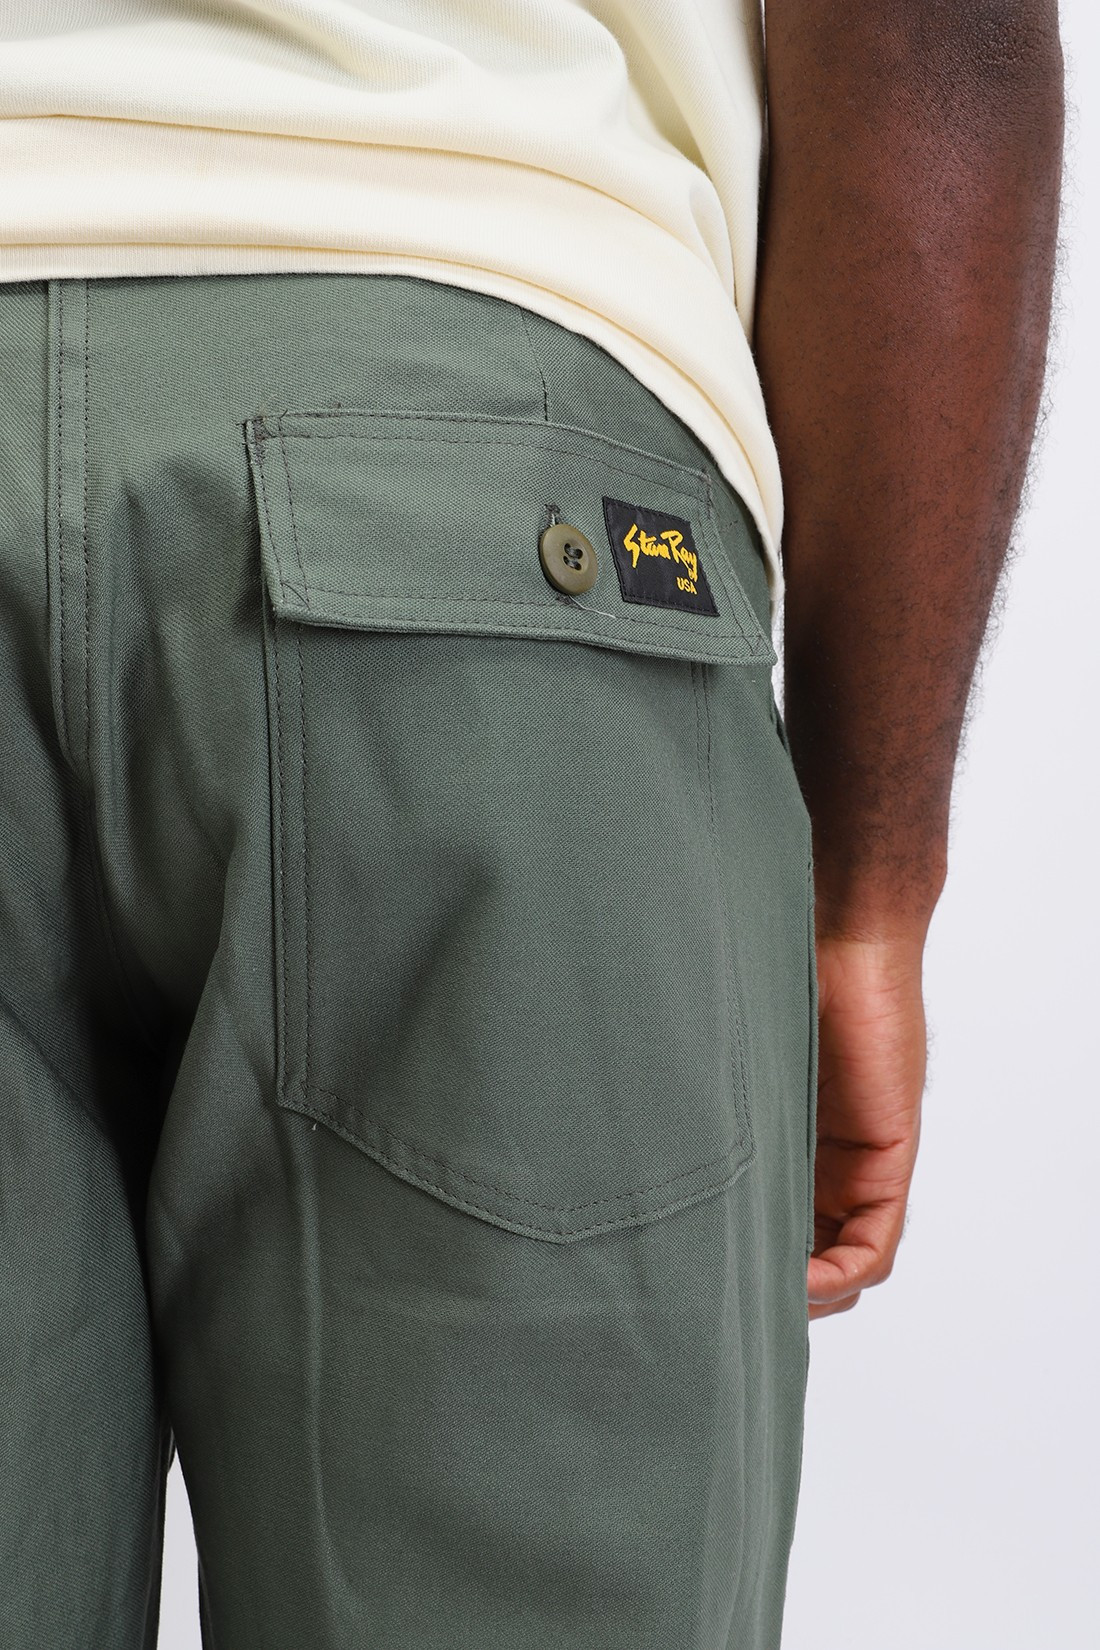 STAN RAY / Taper fatigue pant Olive